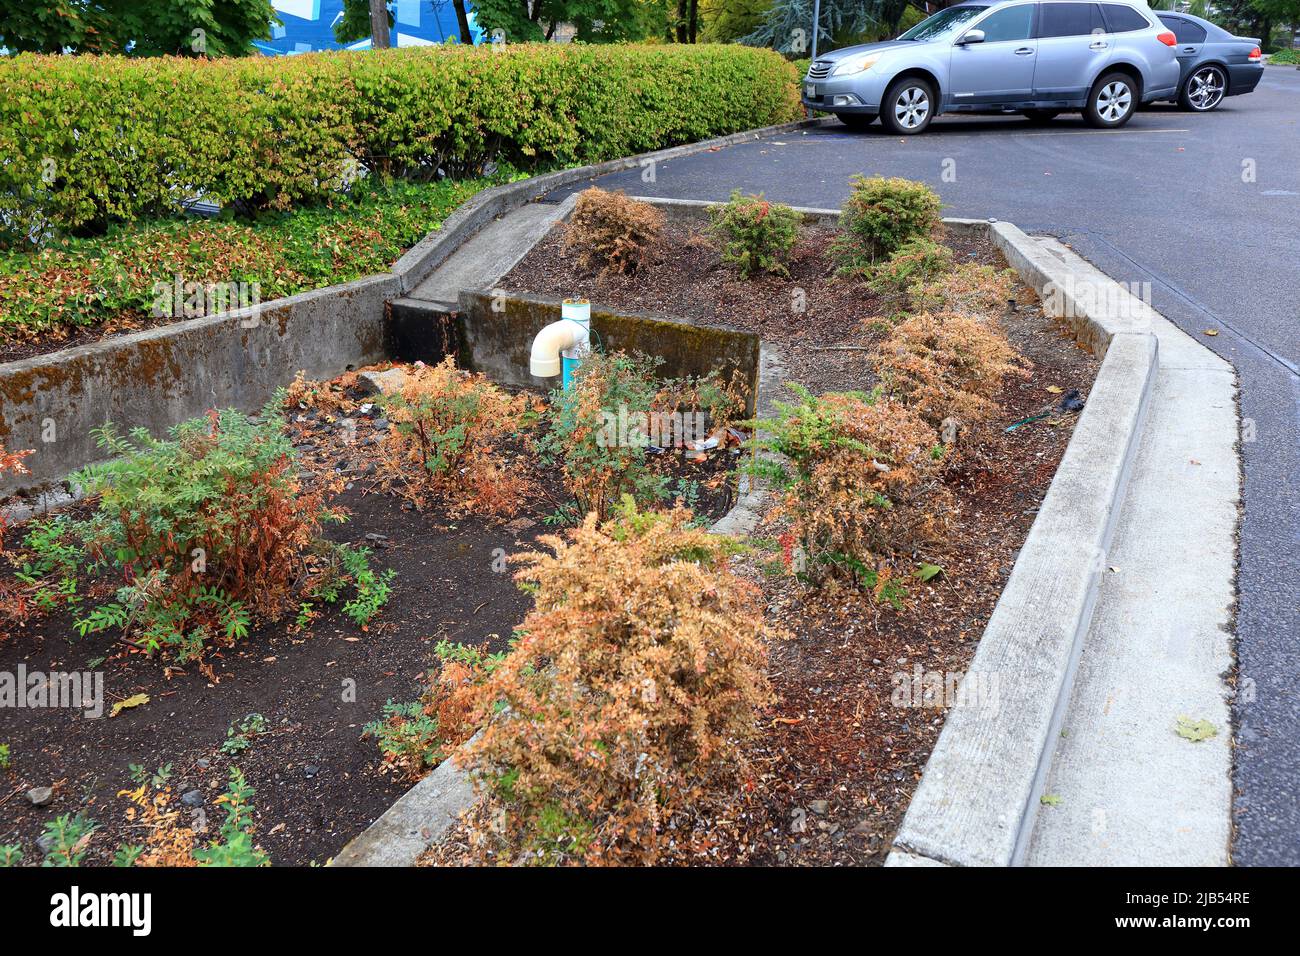 A stormwater retention basin at a supermarket parking lot at 3030 NE Weidler St, Portland, Oregon. The bioretention area is designed to interdict ... Stock Photo